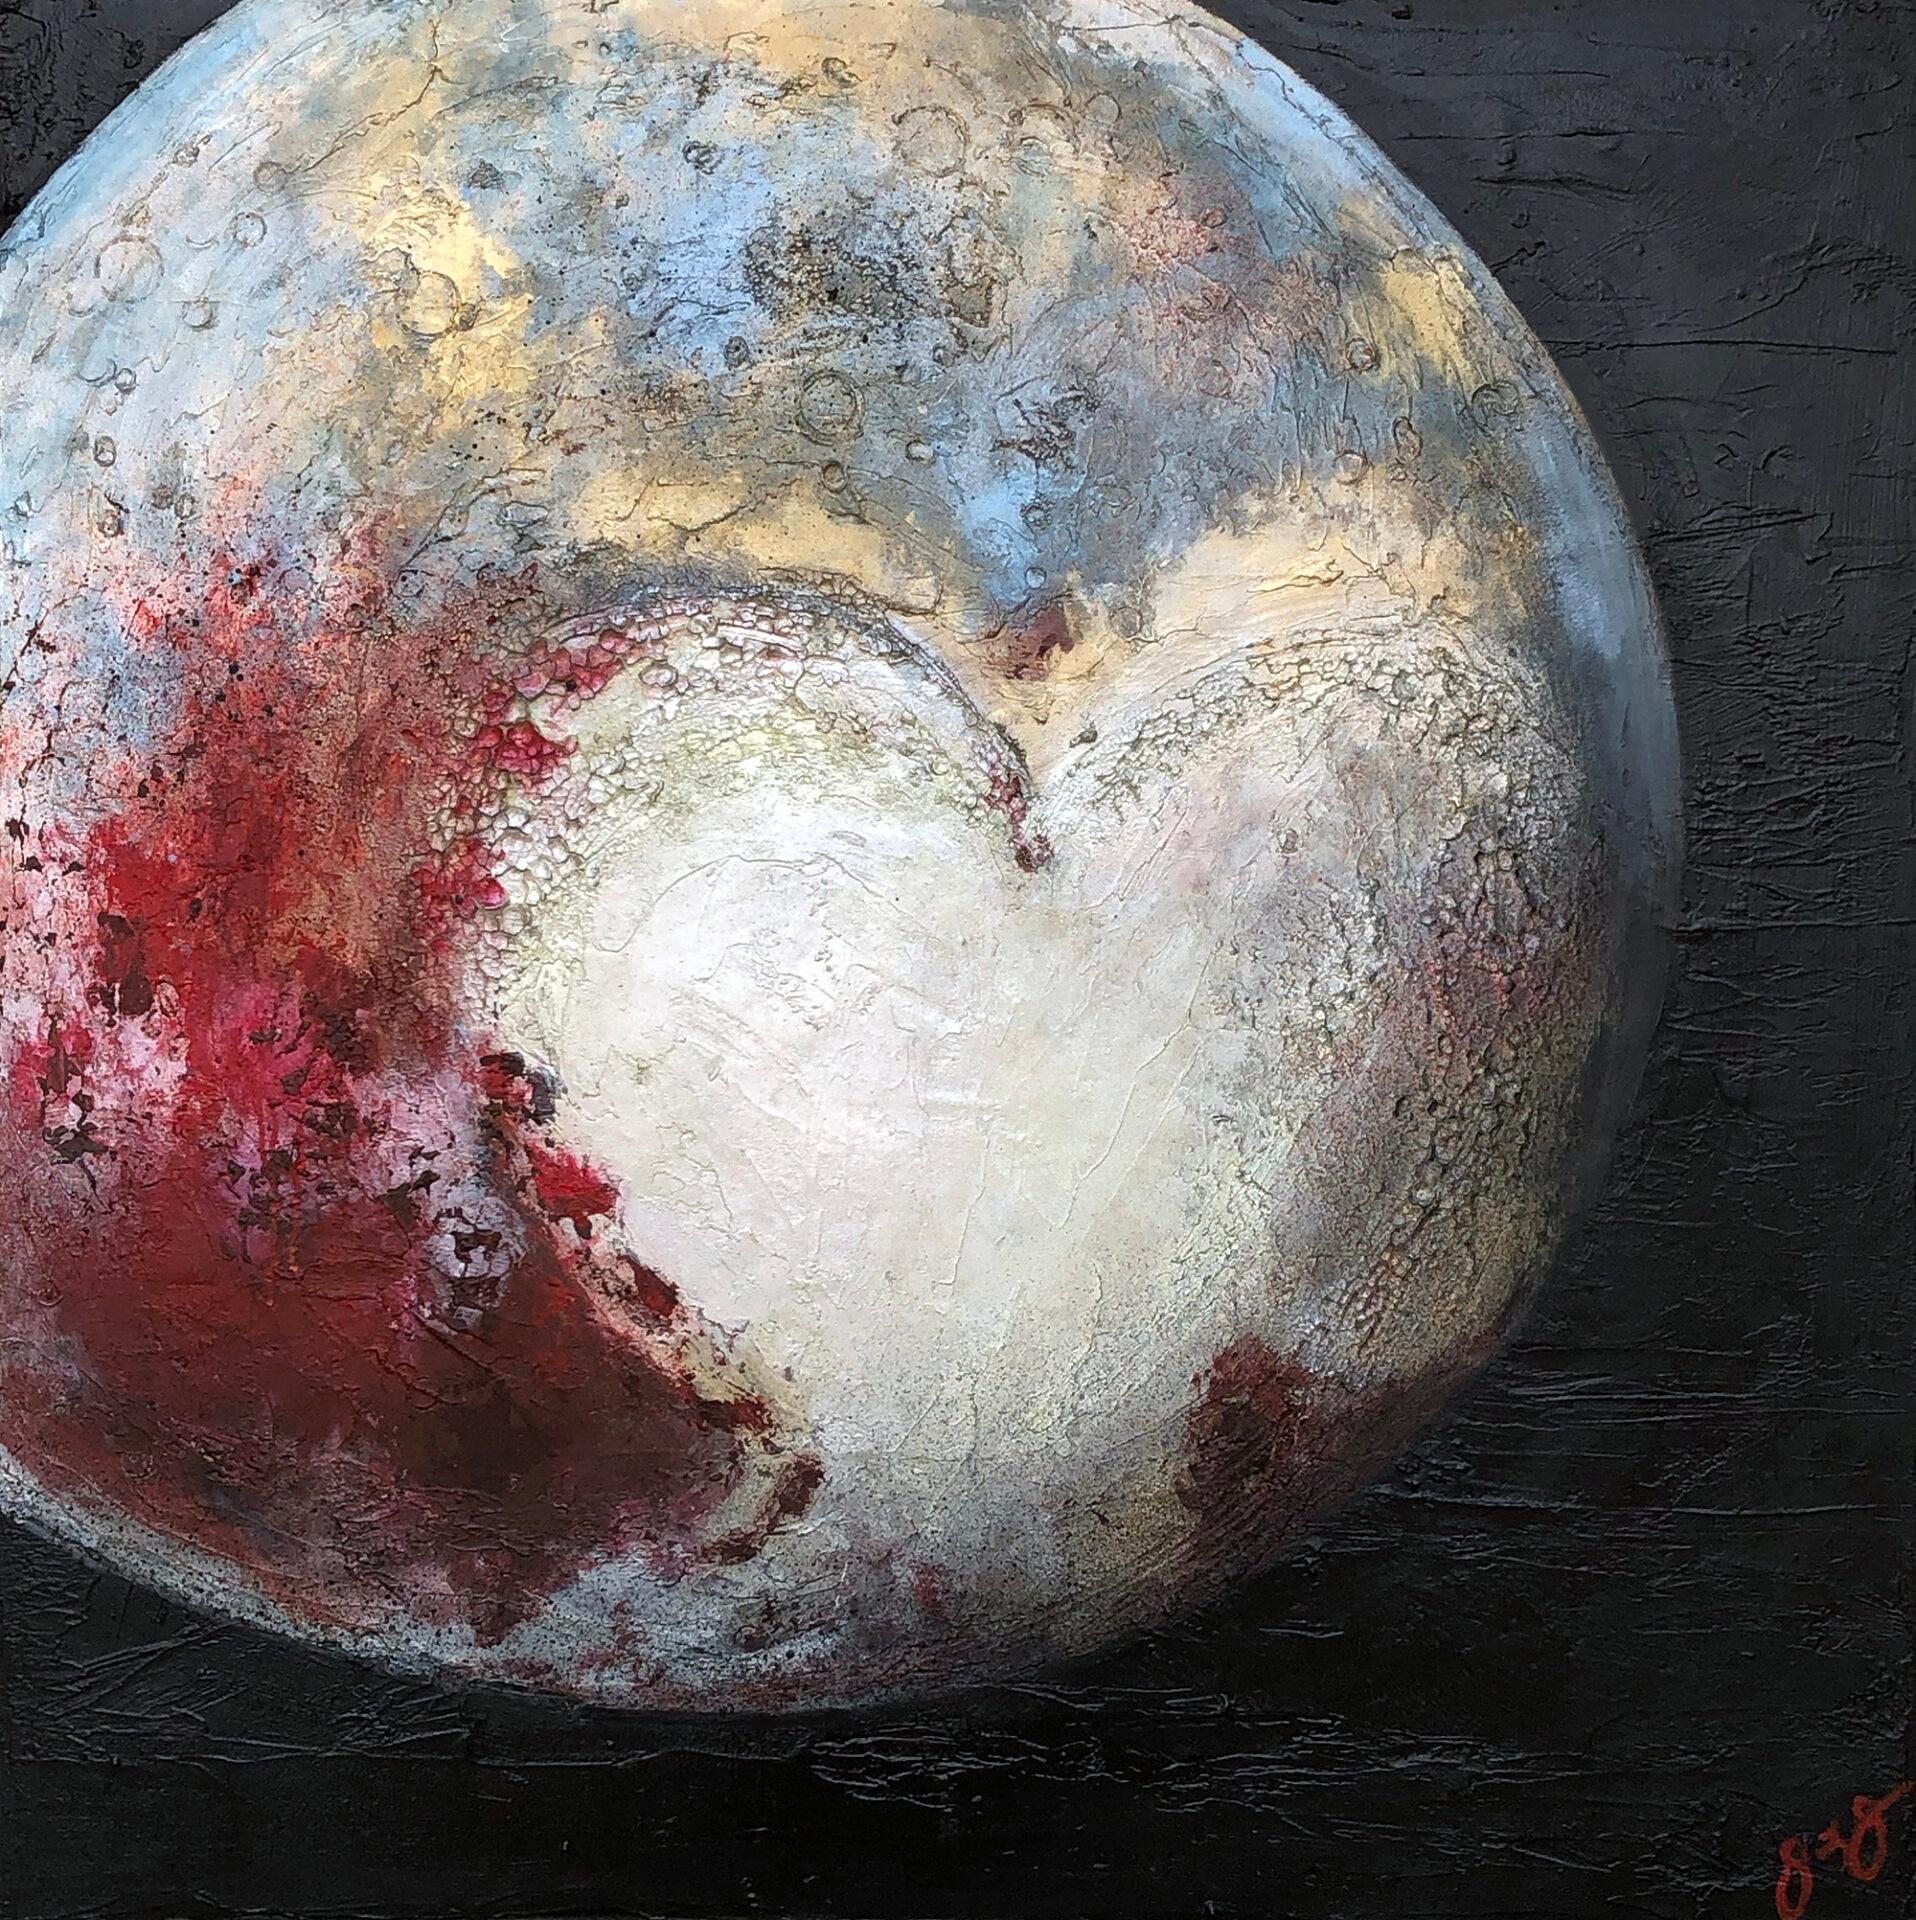 AEON 6: Pluto Has A Heart - Painting by Jason Lincoln Jeffers